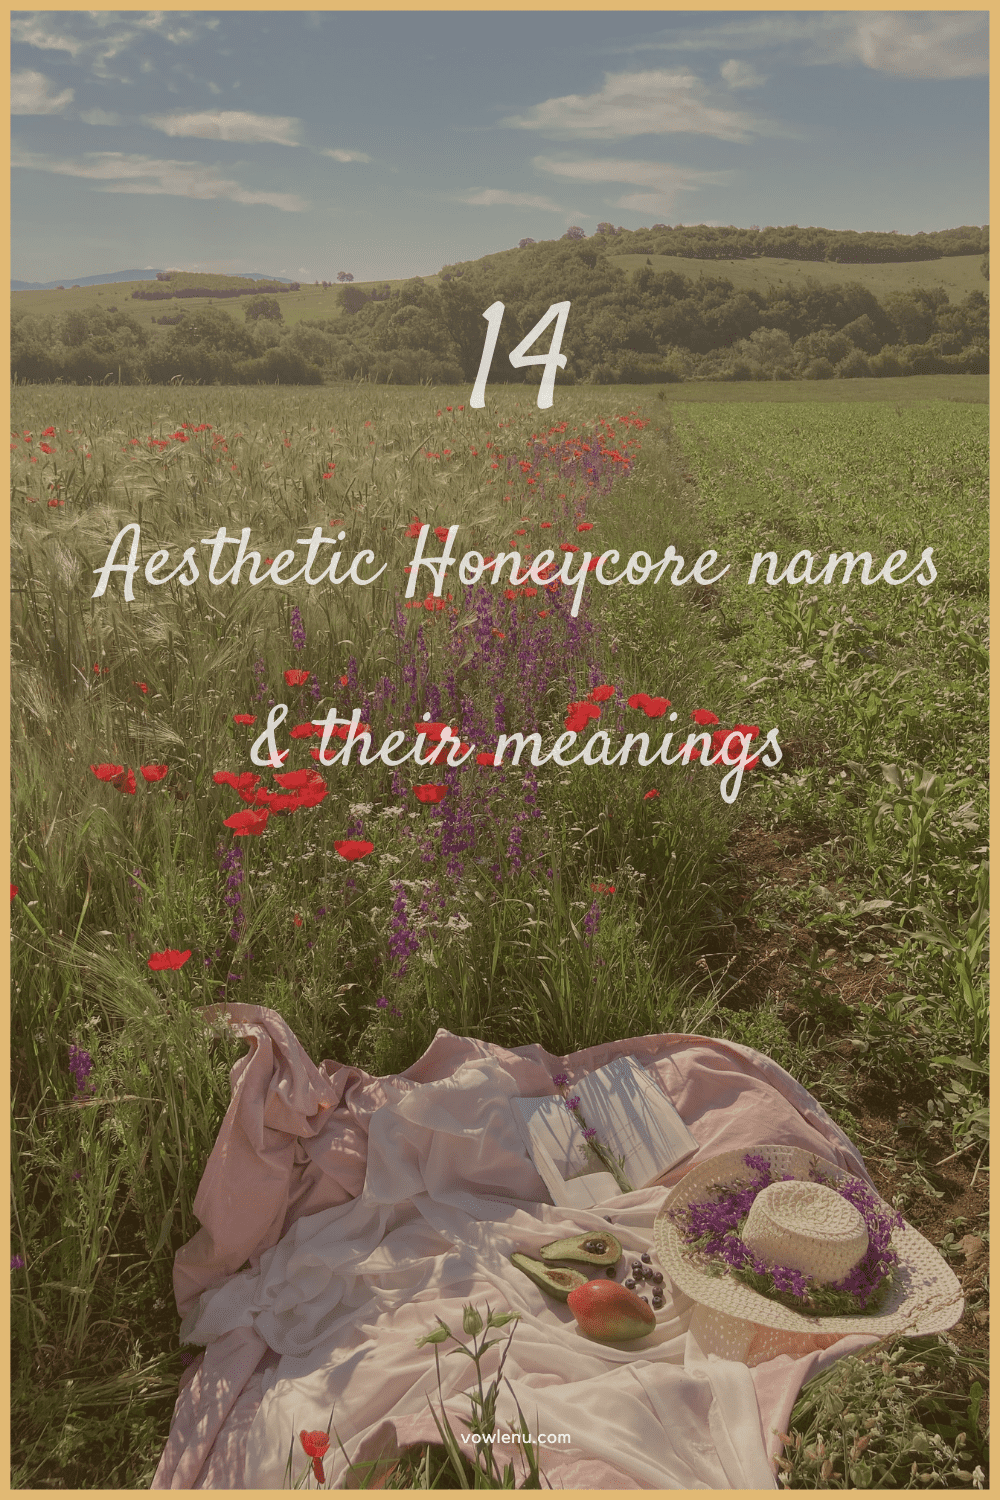 14 Aesthetic honeycore names and their meanings